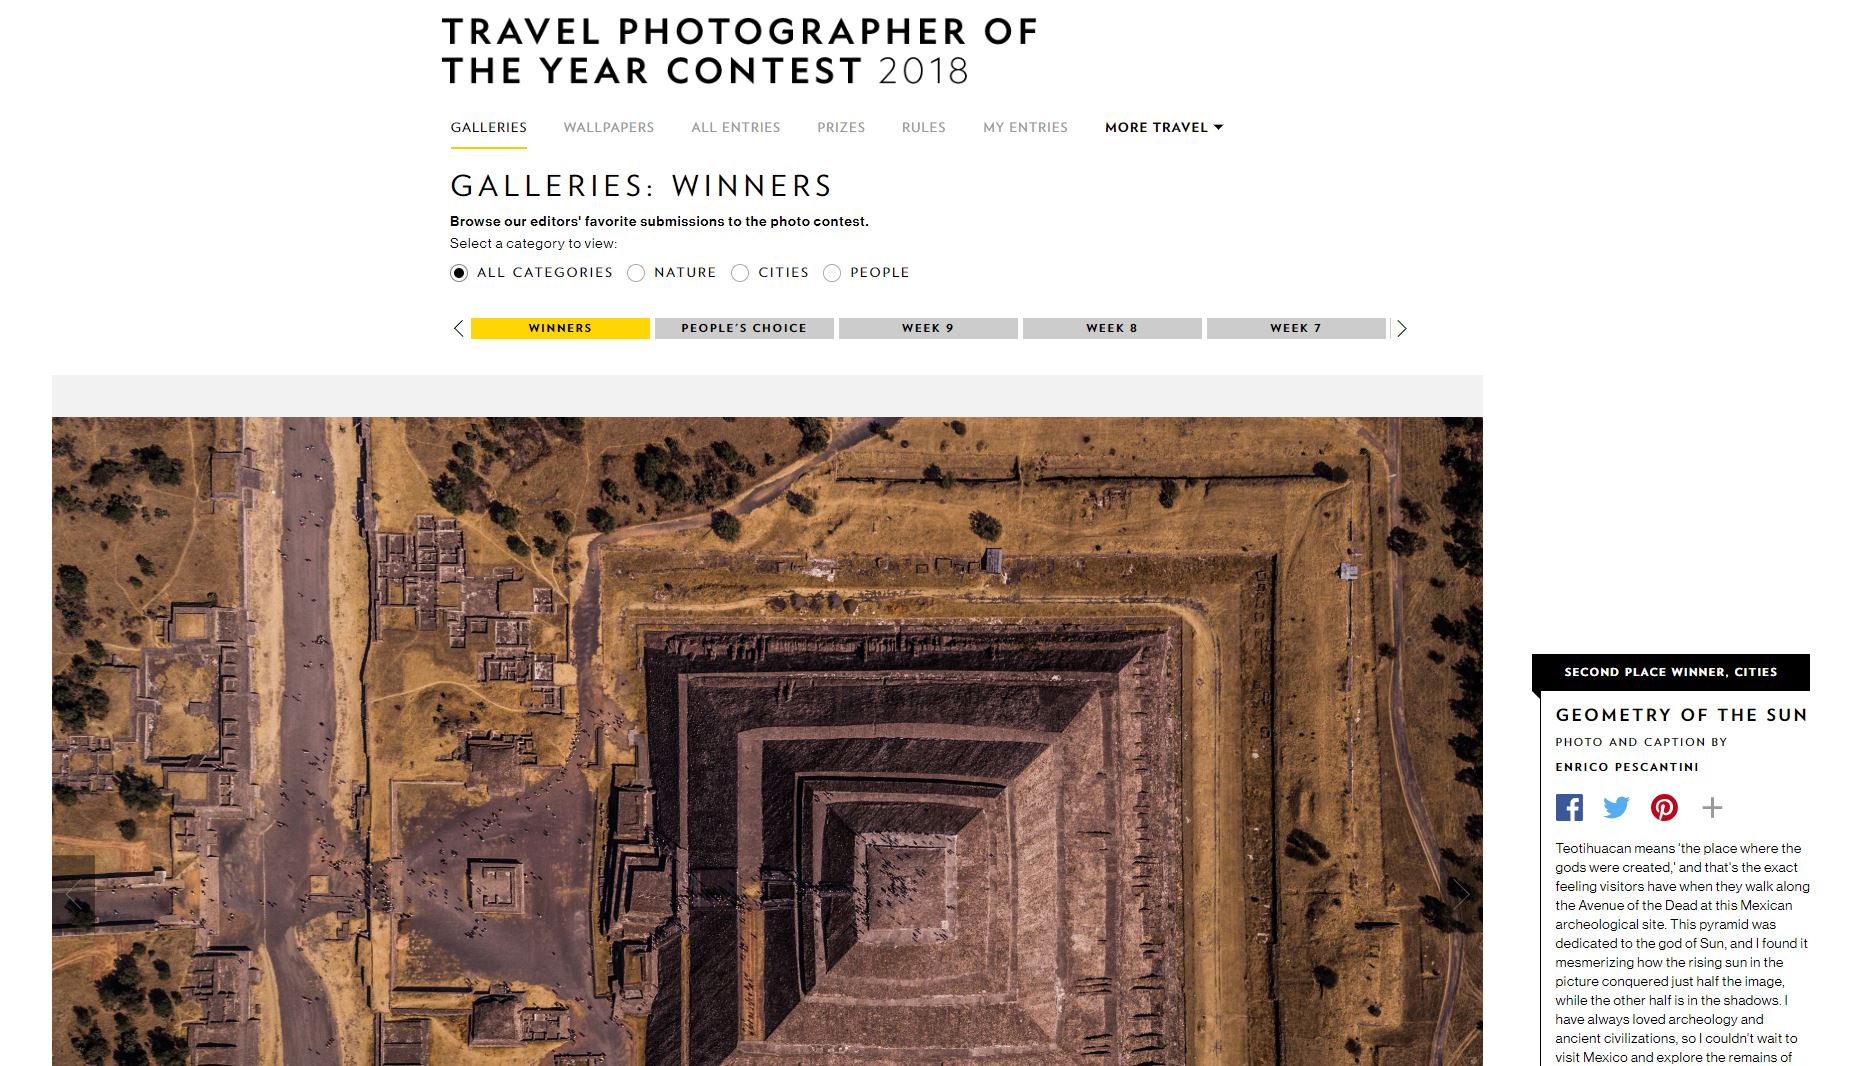 National Geographic Travel Photographer of the year 2018 Cities Winner Geometry of the Sun Enrico Pescantini